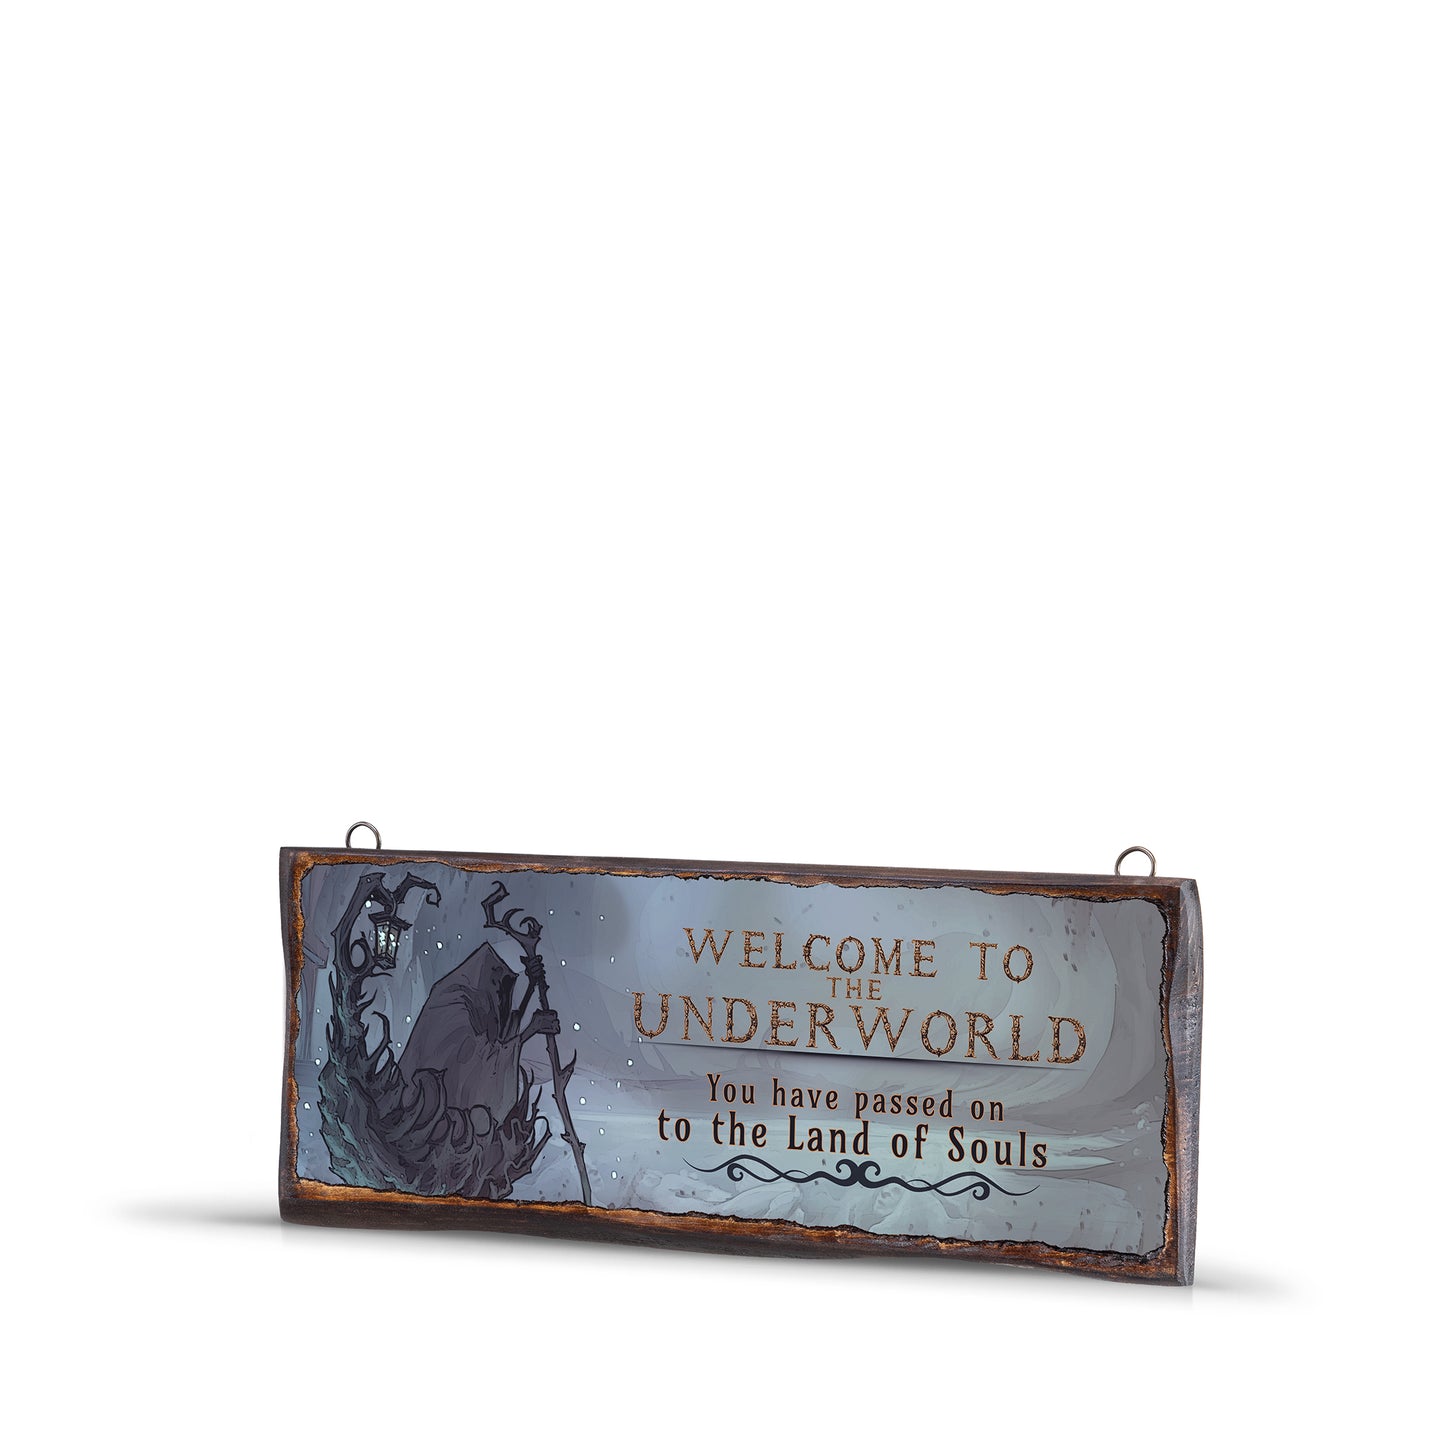 WELCOME TO THE UNDERWORLD WOODEN SIGN - WS027